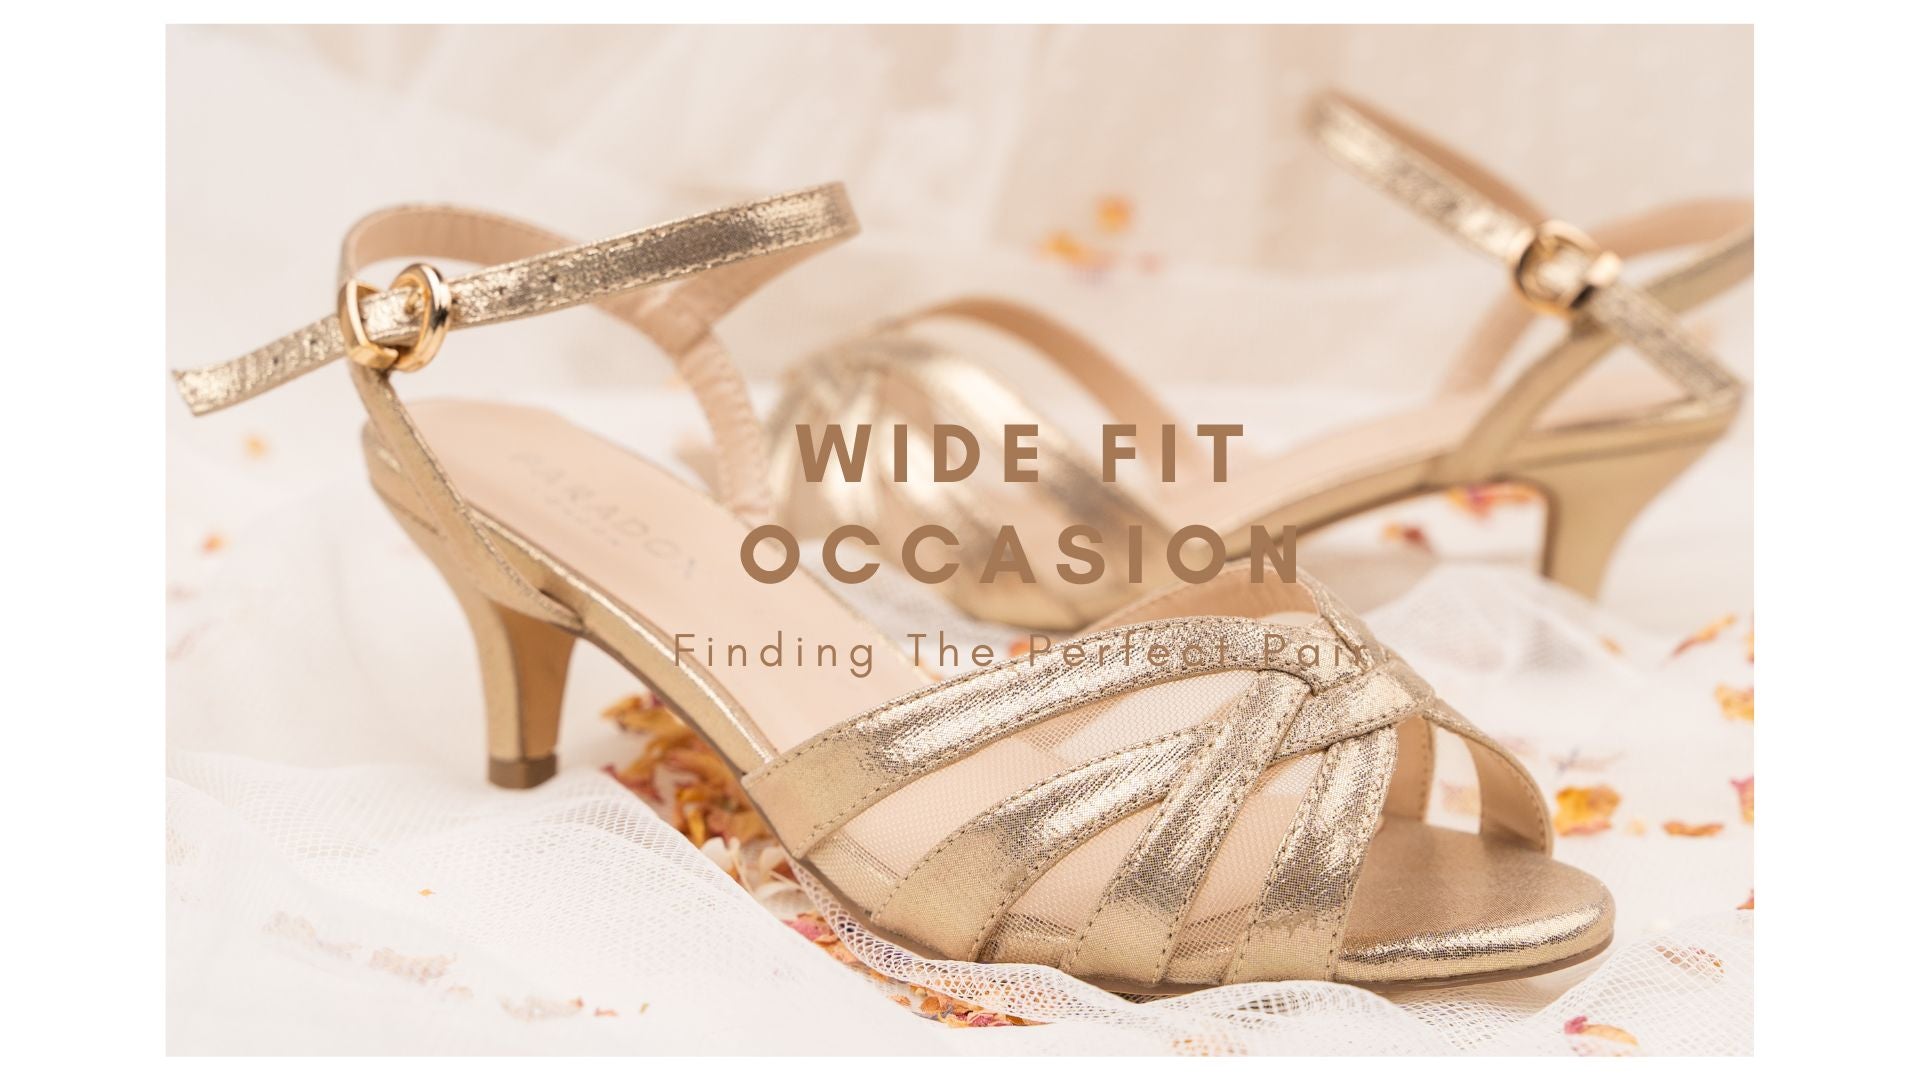 Wide Fit Party Shoes: Finding the Perfect Pair